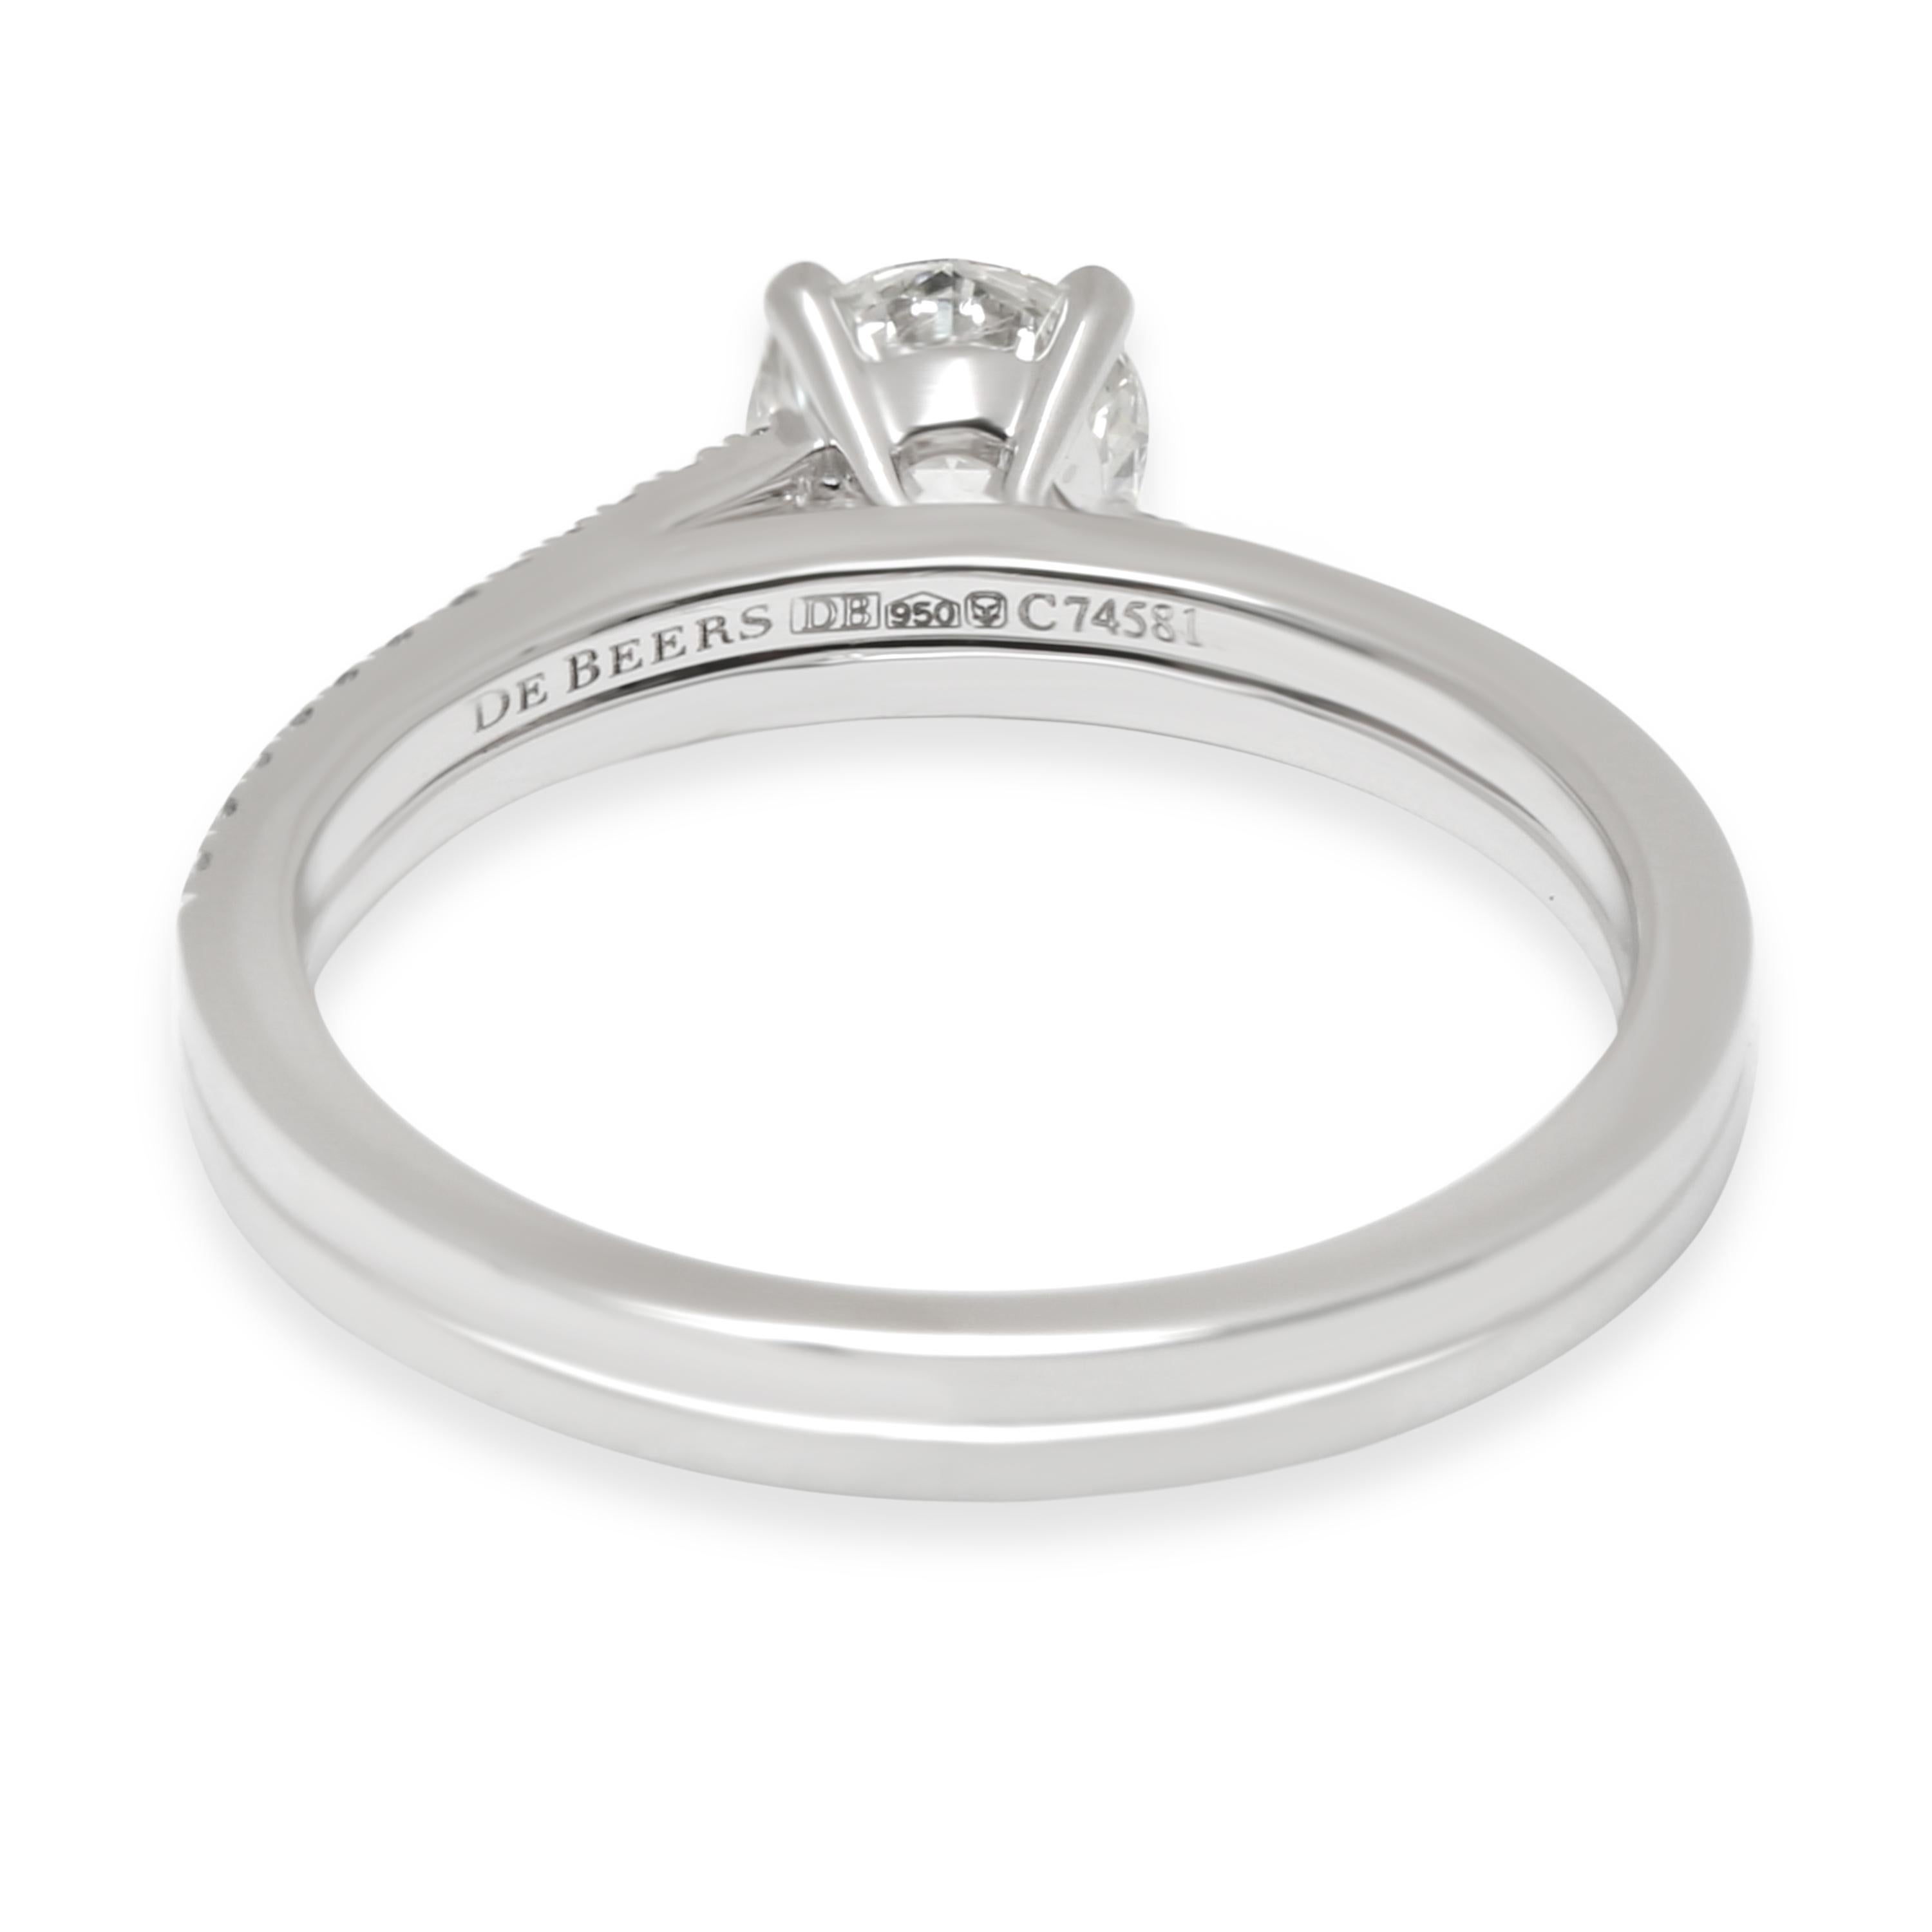 
DeBeers Diamond Promise Engagement Ring in Platinum I SI1 0.69 CTW

PRIMARY DETAILS
SKU: 103339
Listing Title: DeBeers Diamond Promise Engagement Ring in Platinum I SI1 0.69 CTW
Condition Description: Retails for 5100 USD. In excellent condition